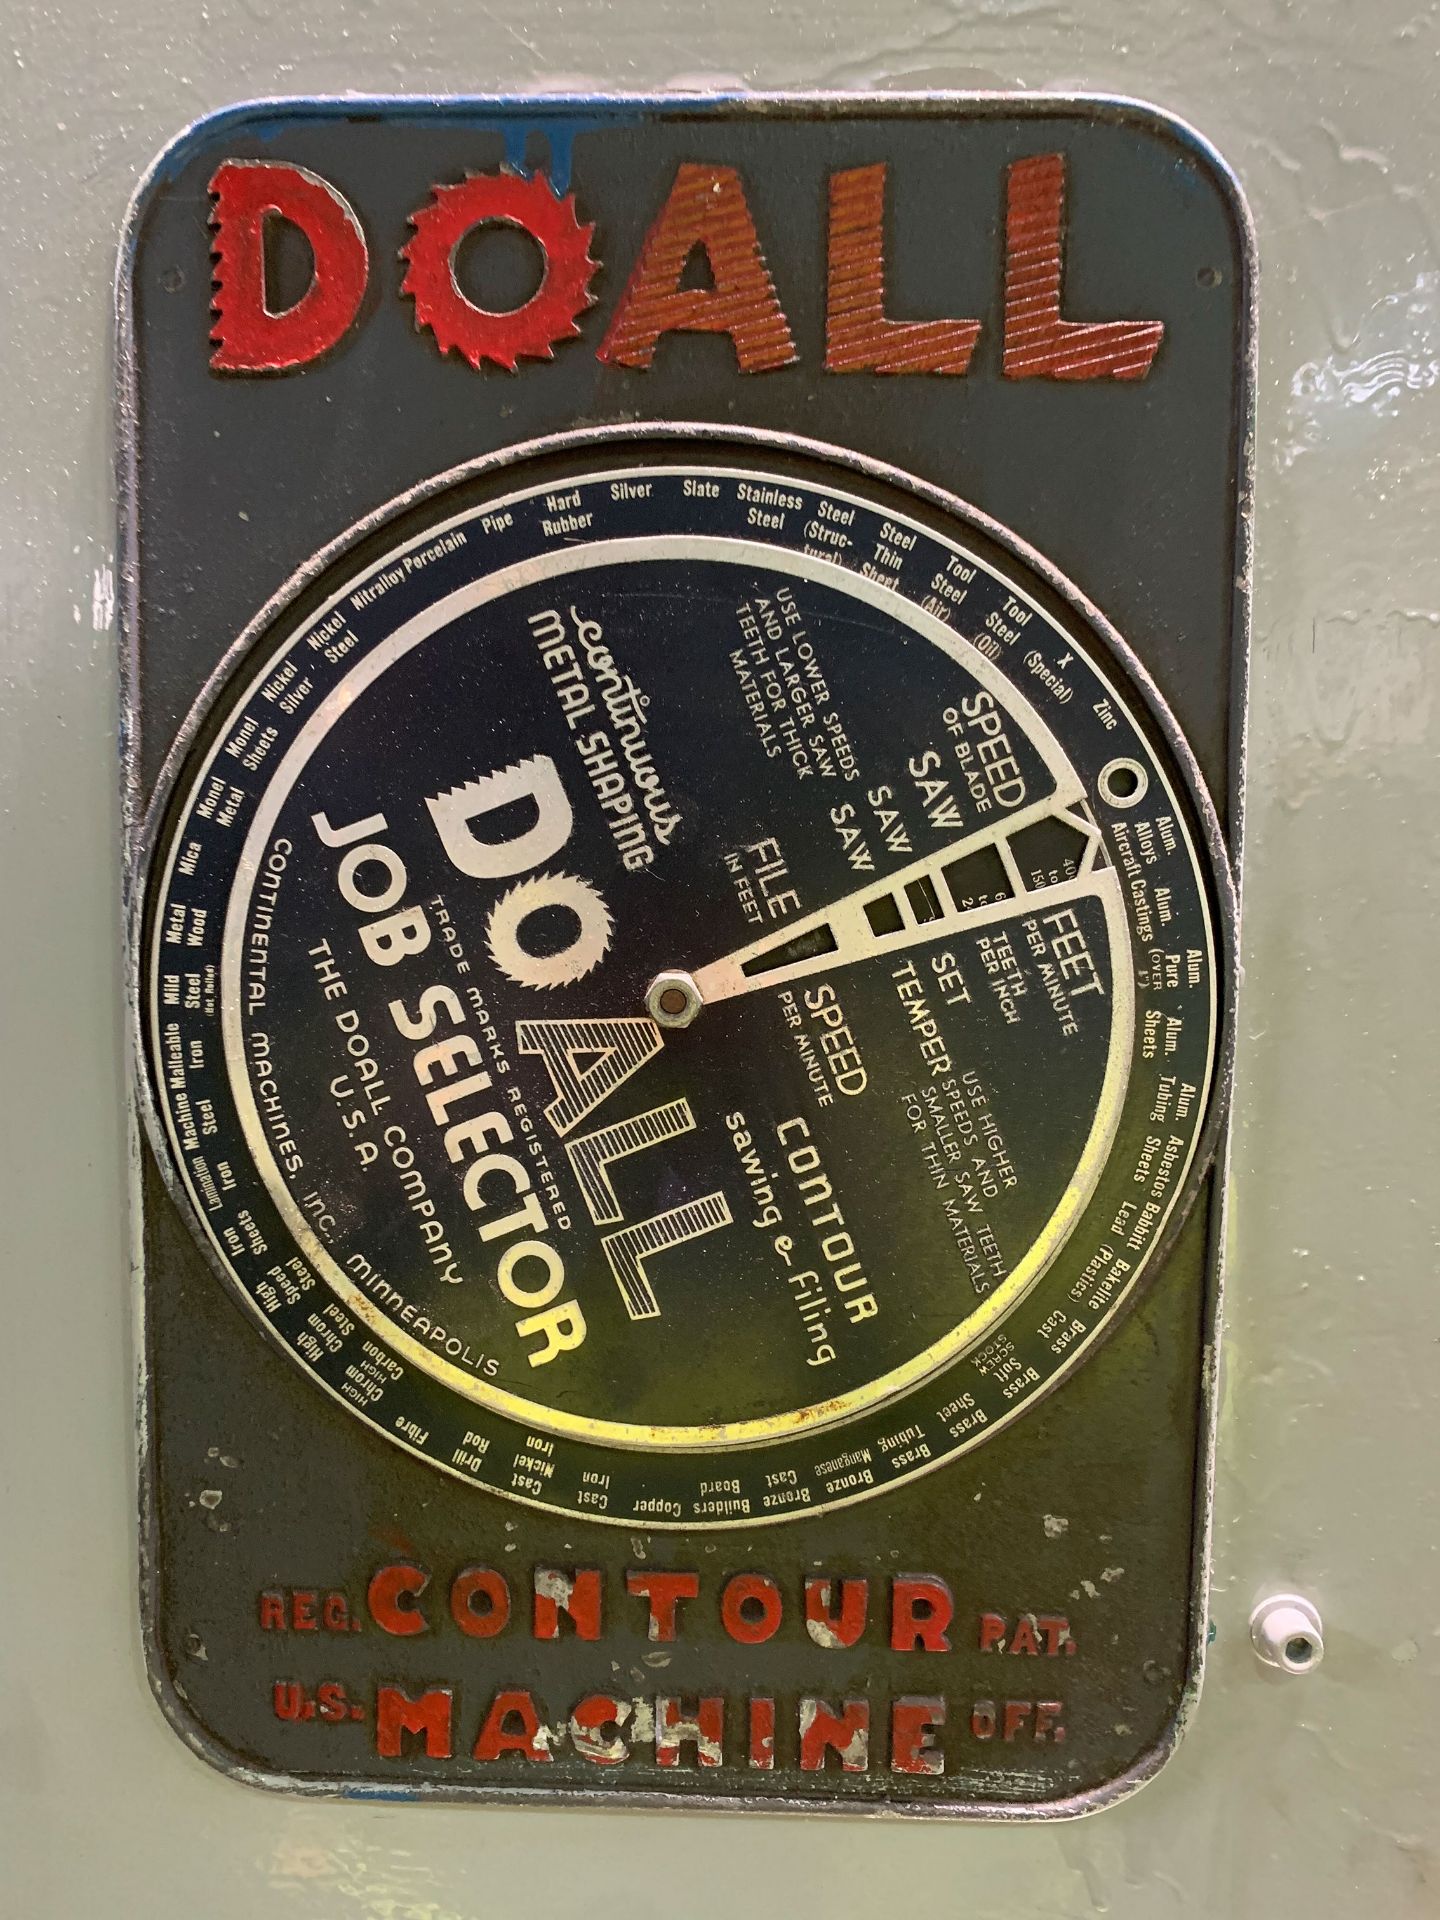 Doall Vertical Metal Bandsaw. - Image 5 of 9